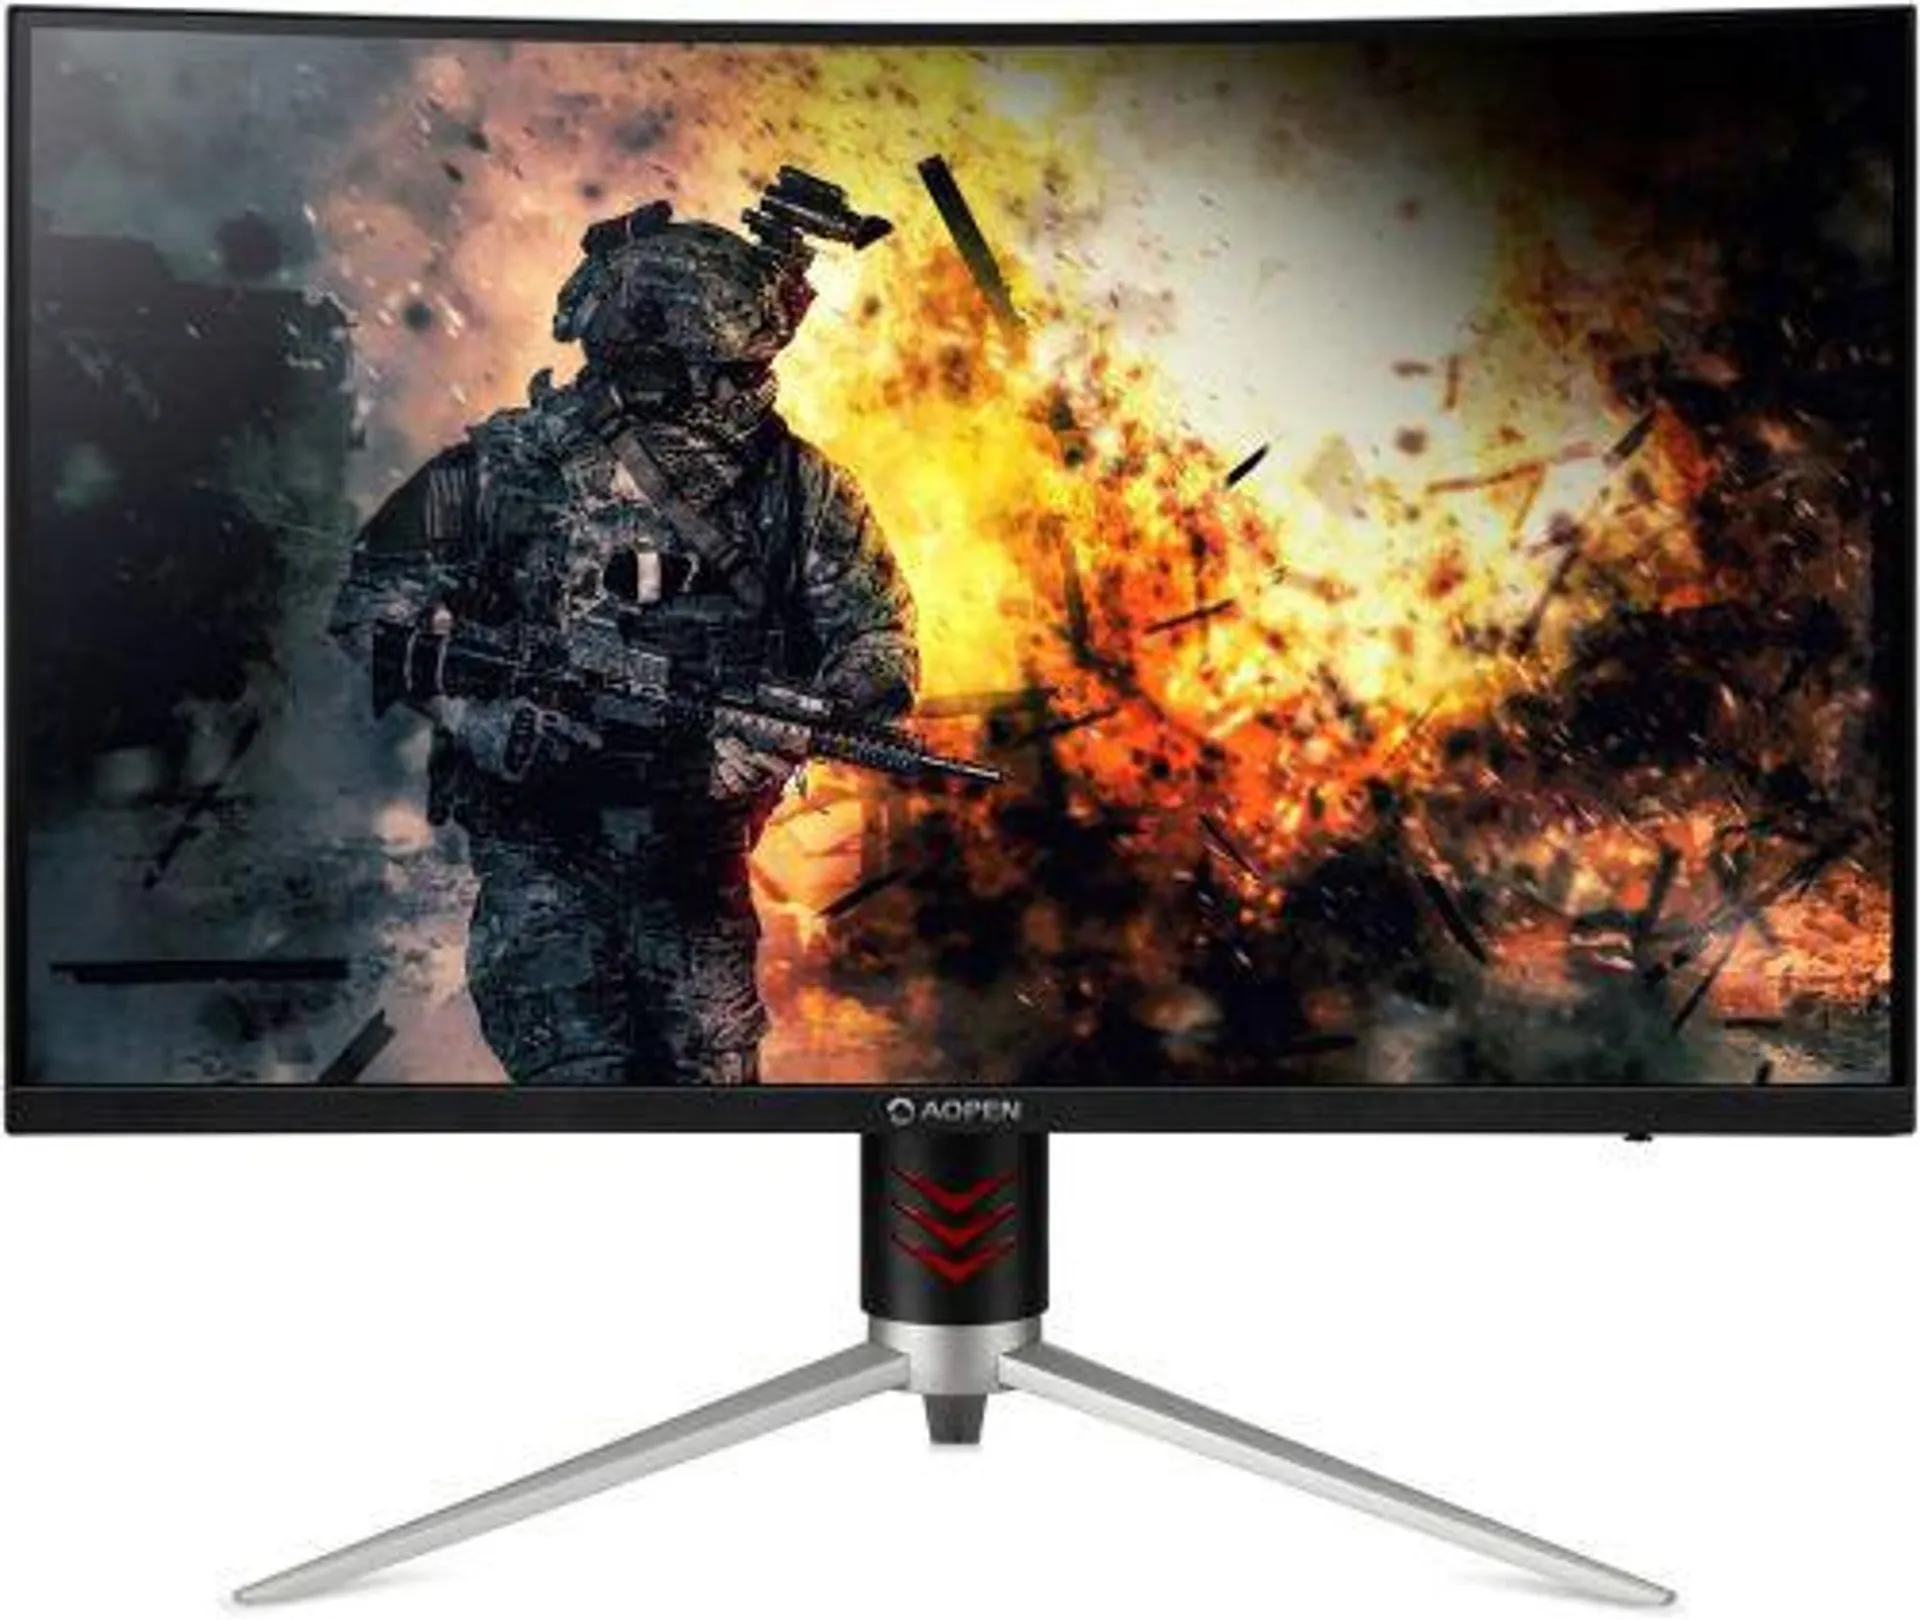 27" AOPEN HC2 Series Curved Gaming Monitor - 27HC2R Pbmiiphx